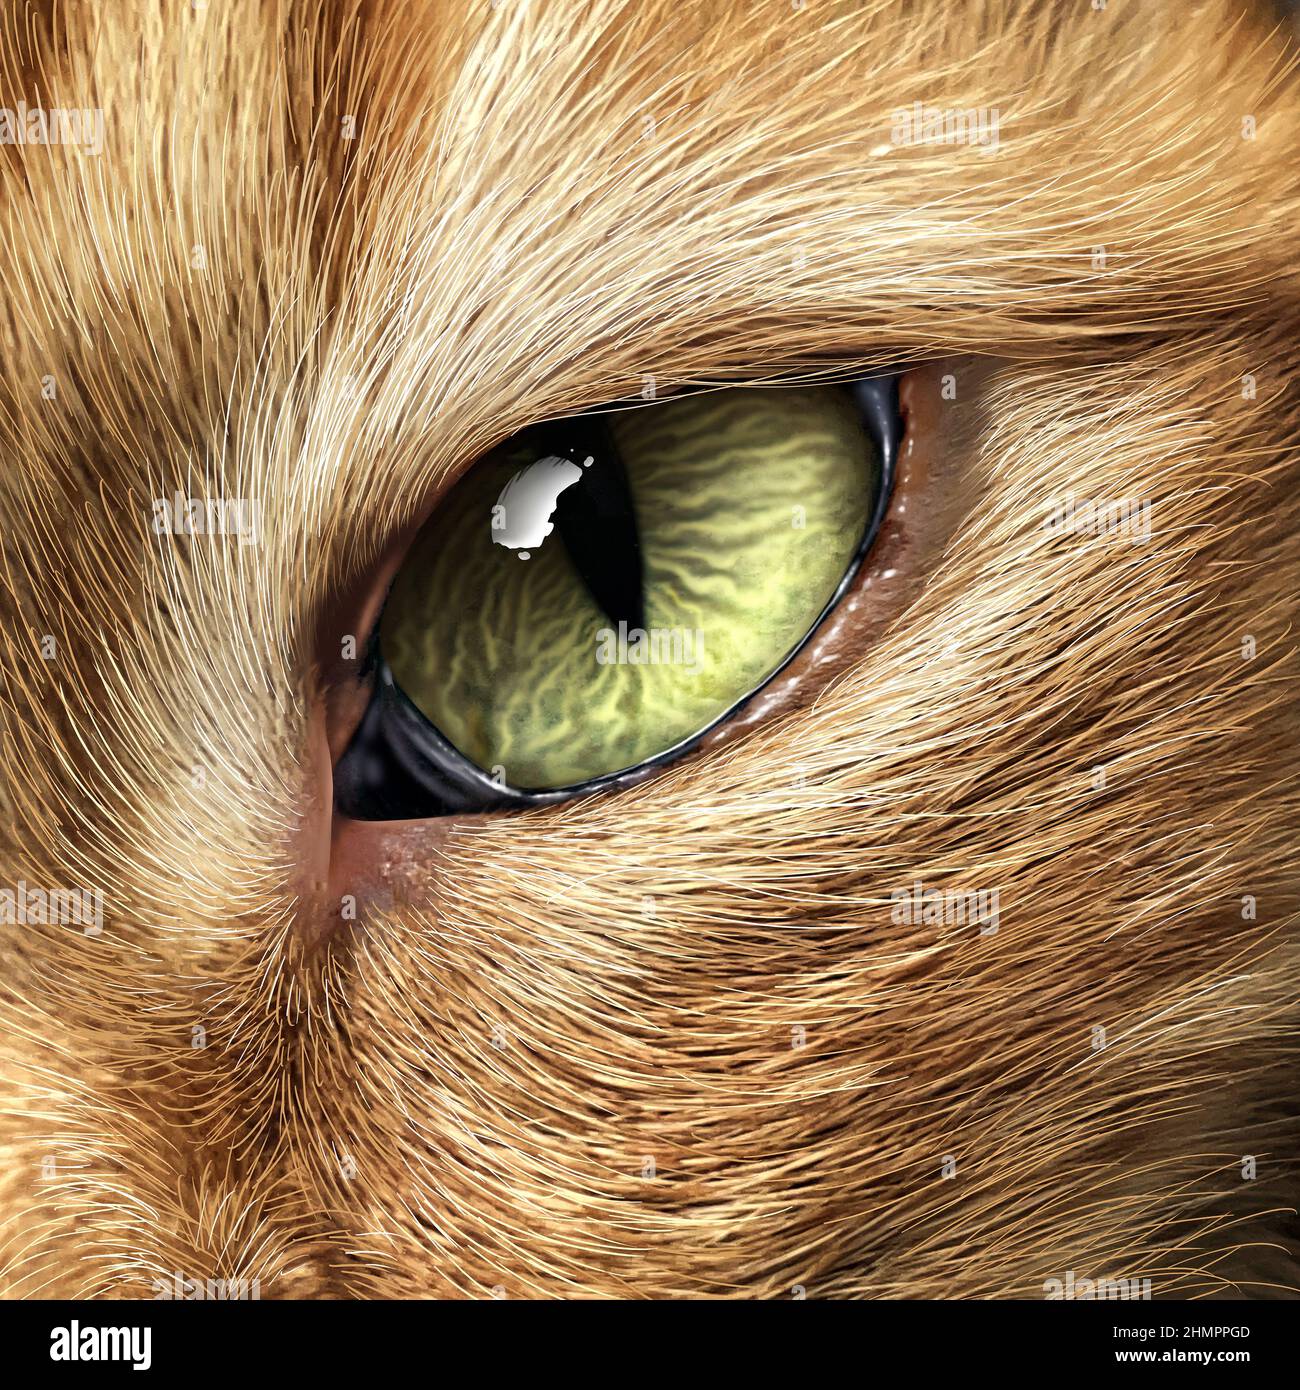 Cat Eye close up as a feline or kitten looking for prey or staring representing animals and veterinary pet care in a 3D illustration style. Stock Photo